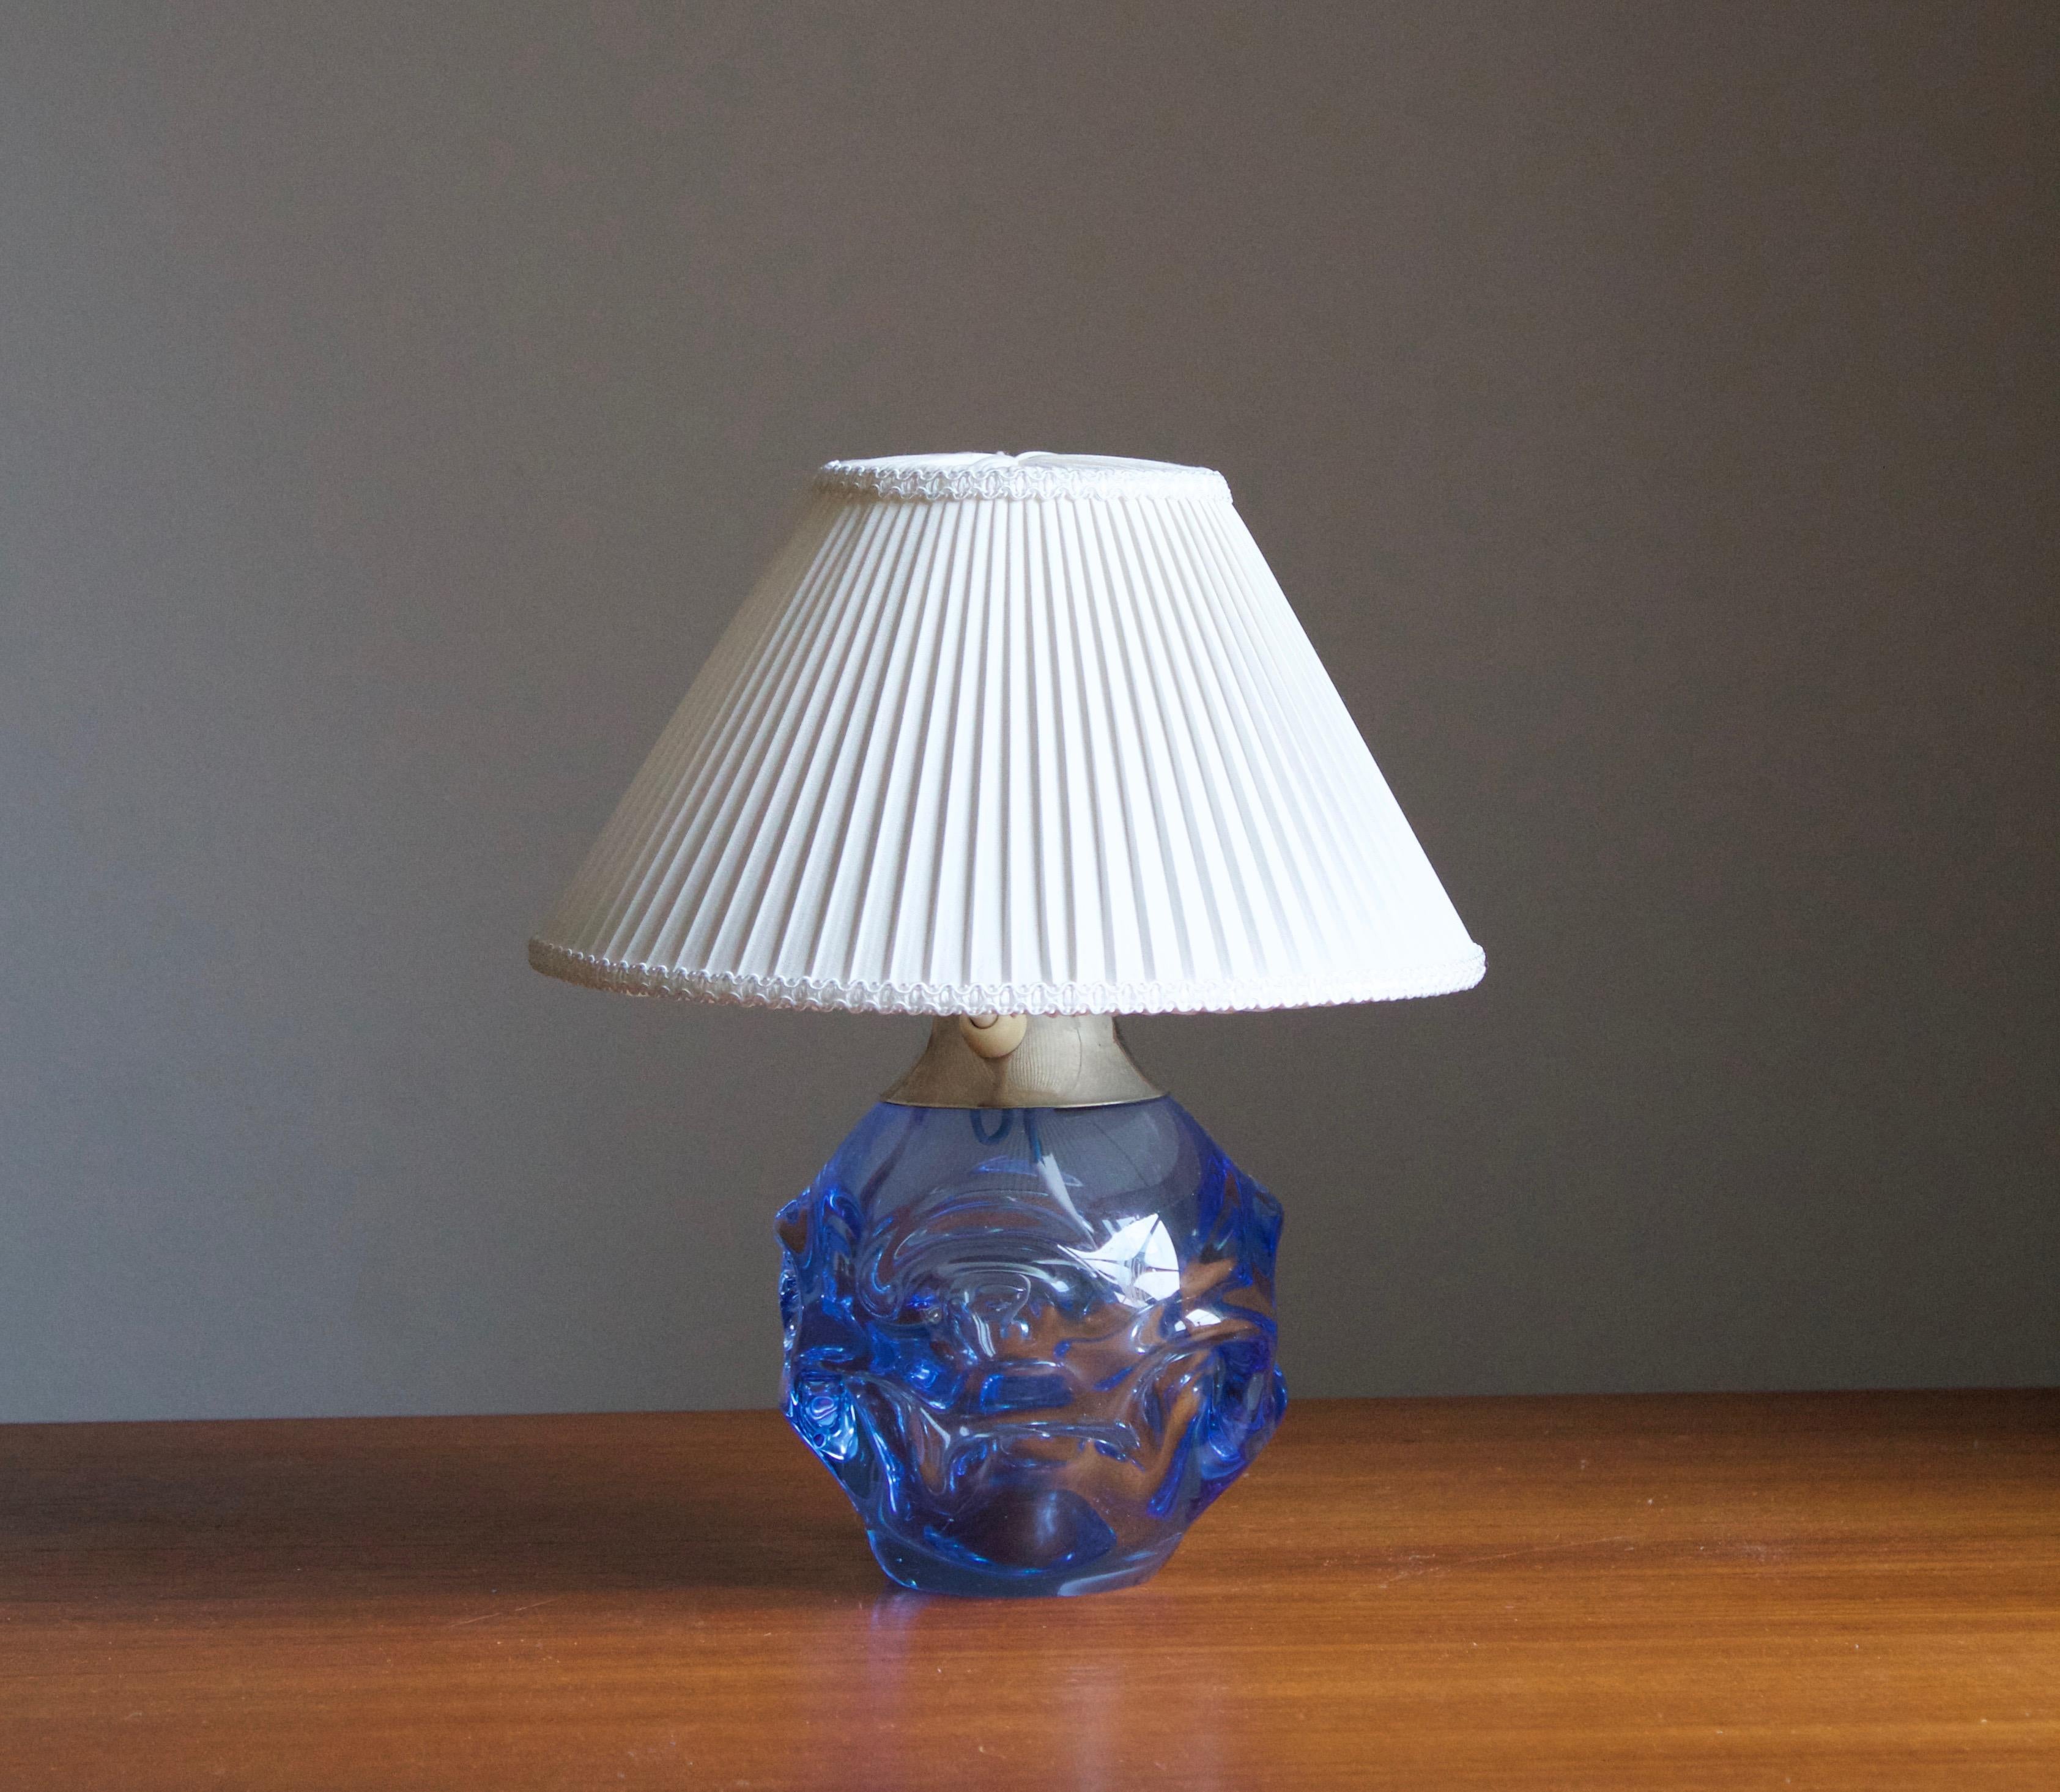 A small organic table lamp in highly artistic form. Design attributed to Börne Augustsson, Åseda Sweden, 1950s. Production by Kosta, labeled.

Stated dimensions exclude lampshade, height includes socket. Upon request illustrated lampshade can be